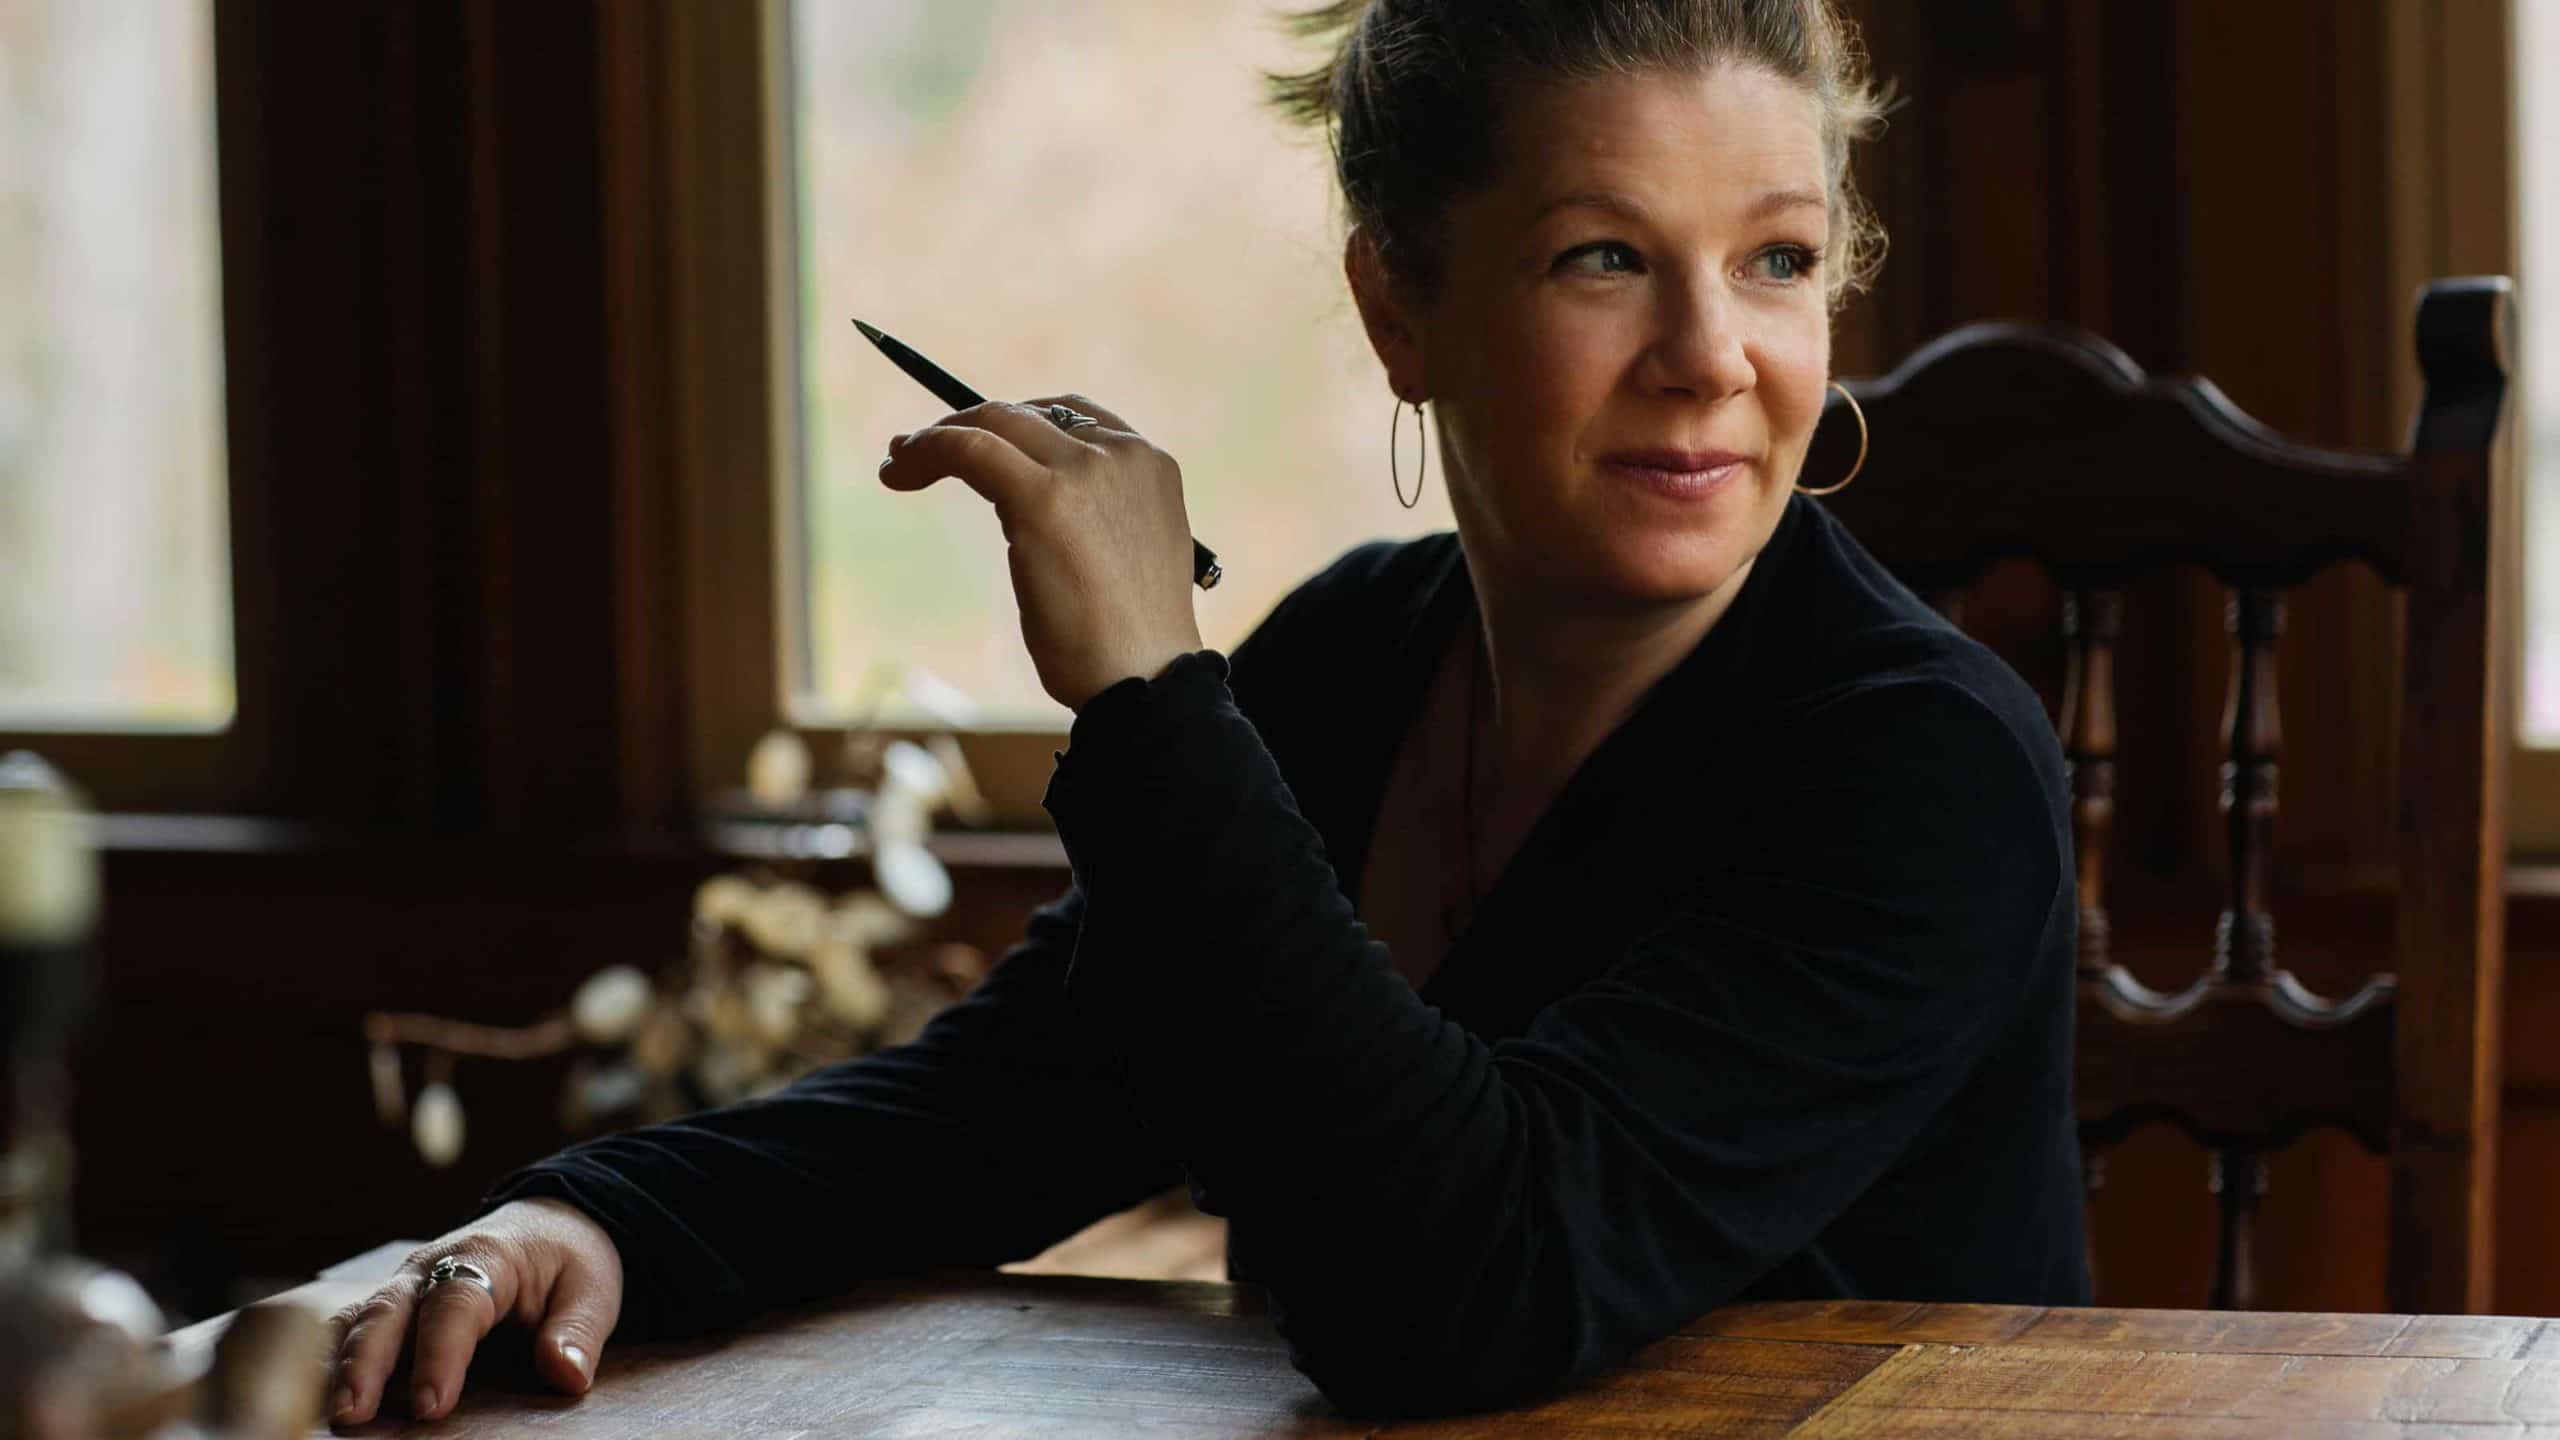 Nationally acclaimed singer-songwriter Dar Williams sits at her dining table with a pencil in hand. Press photo courtesy of the artist.